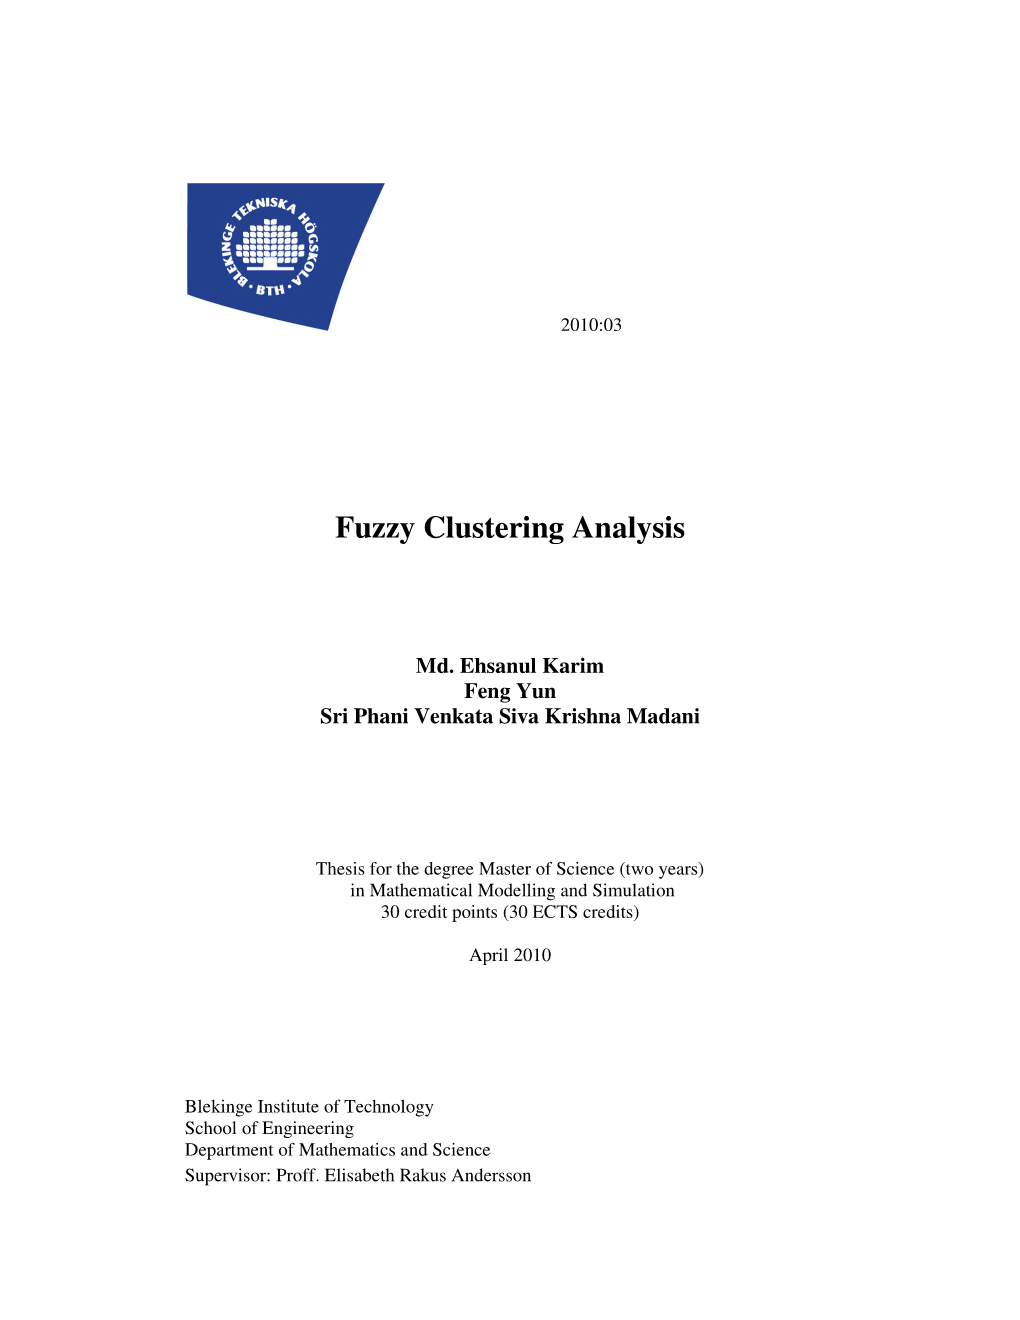 Fuzzy Clustering Analysis